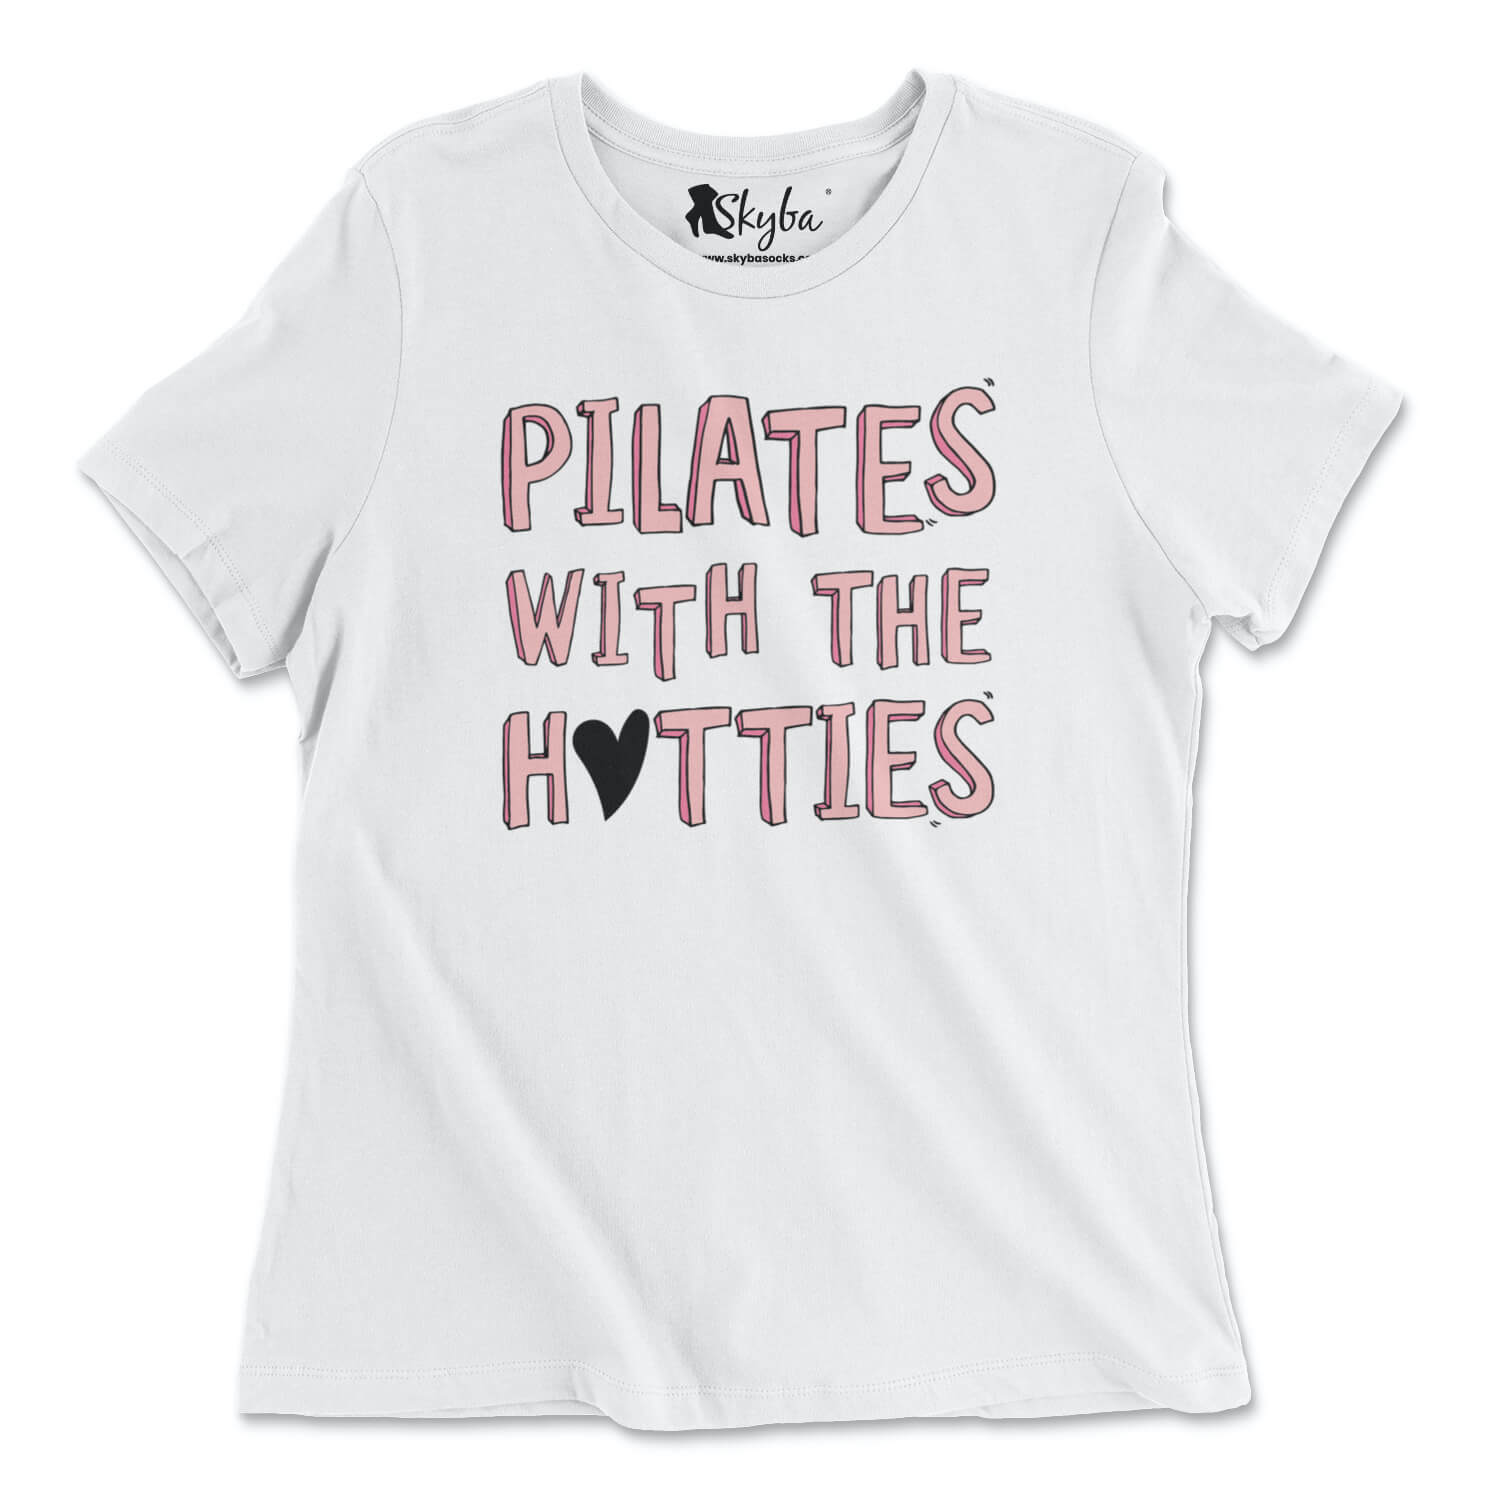 Pilates With The Hotties - Classic Tee Skyba T-Shirt